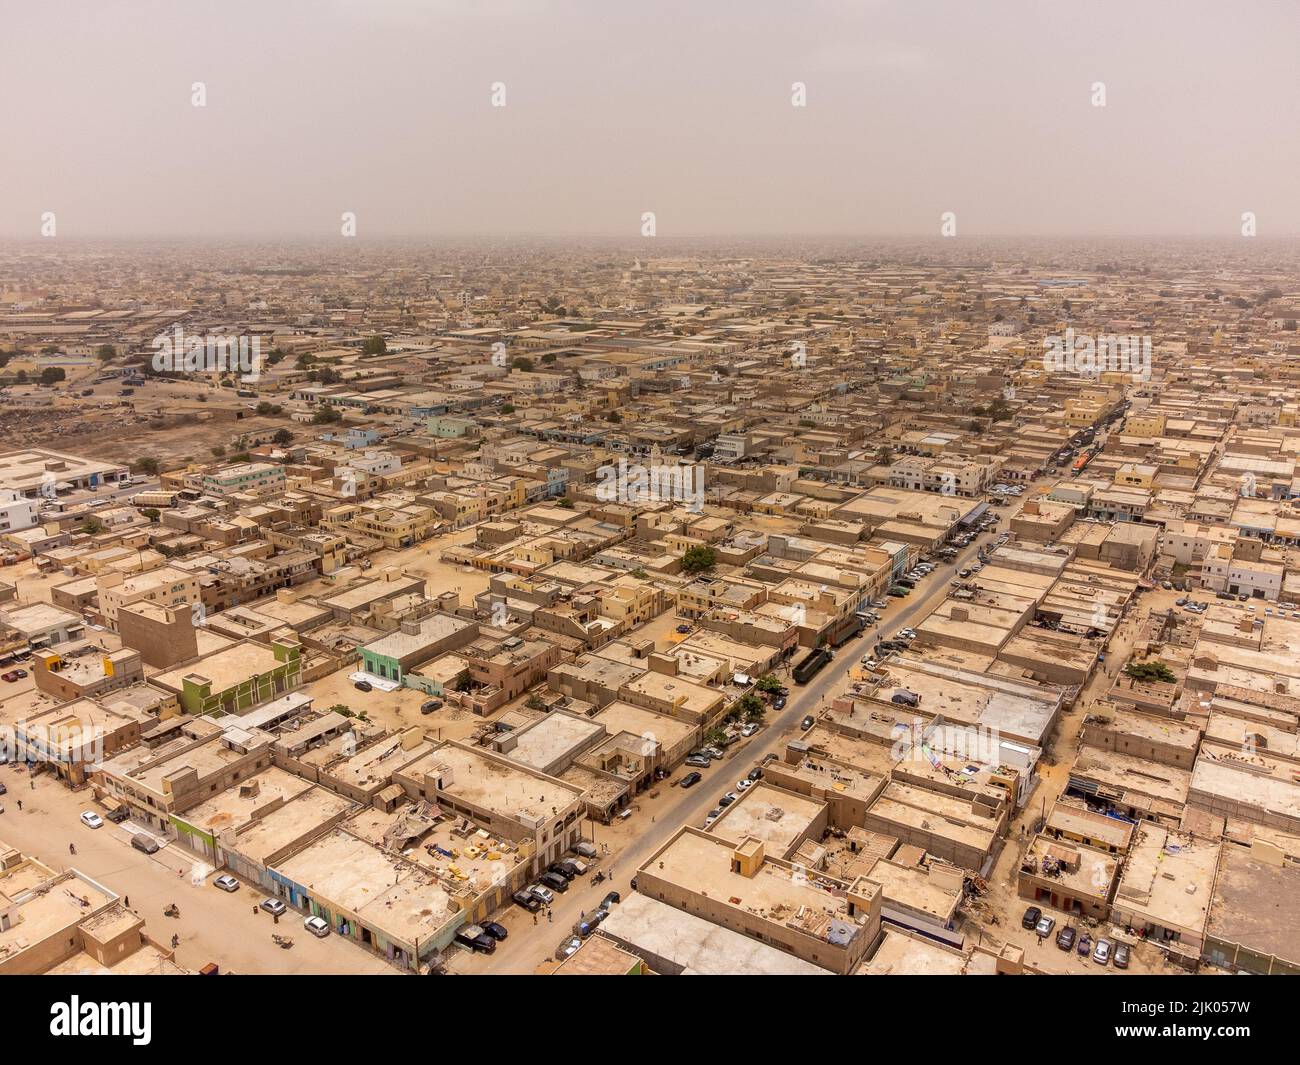 An aerial drone panoramic photo of the city of Nouakchott, Mauritania. There is sand in the air and you cannot see the background clearly. Stock Photo